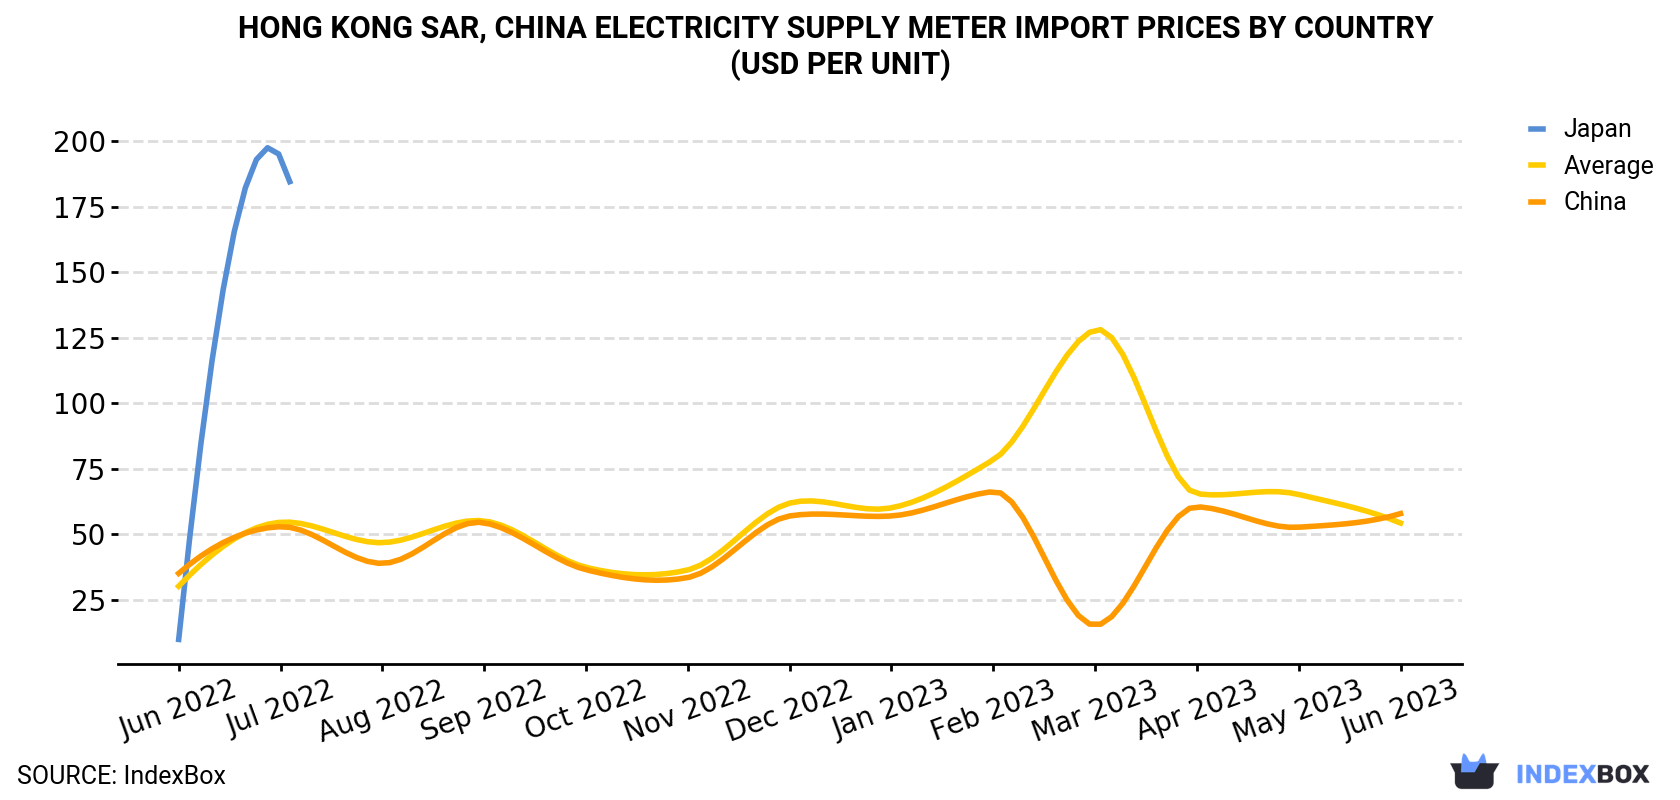 Hong Kong Electricity Supply Meter Import Prices By Country (USD Per Unit)